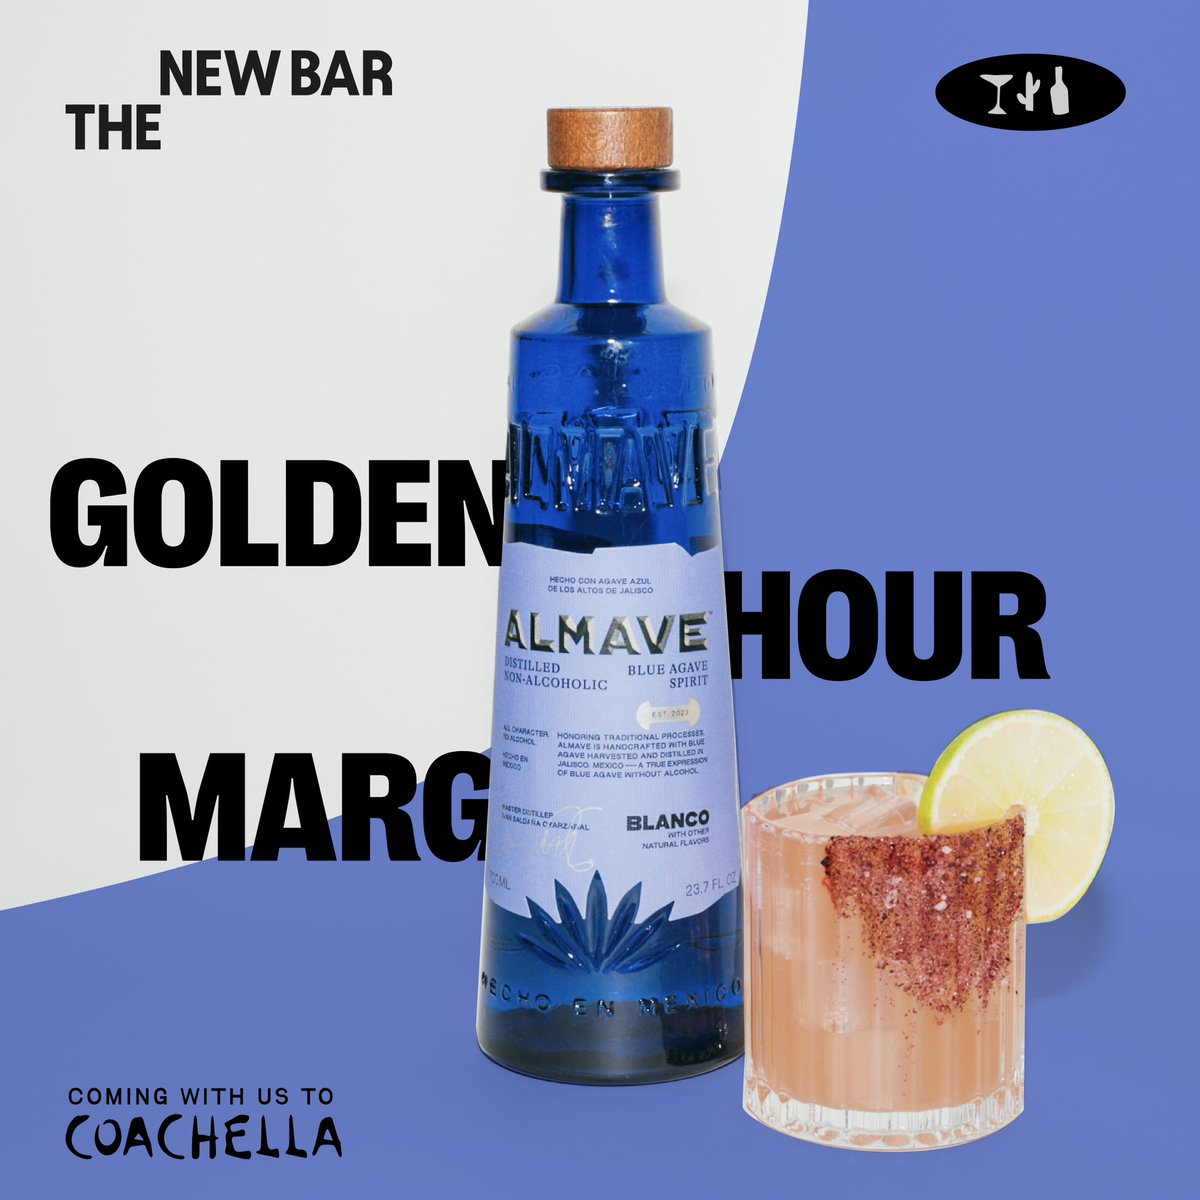 The Golden Hour Margarita, served at #TheNewBar for both @coachella weekends and at @Stagecoach